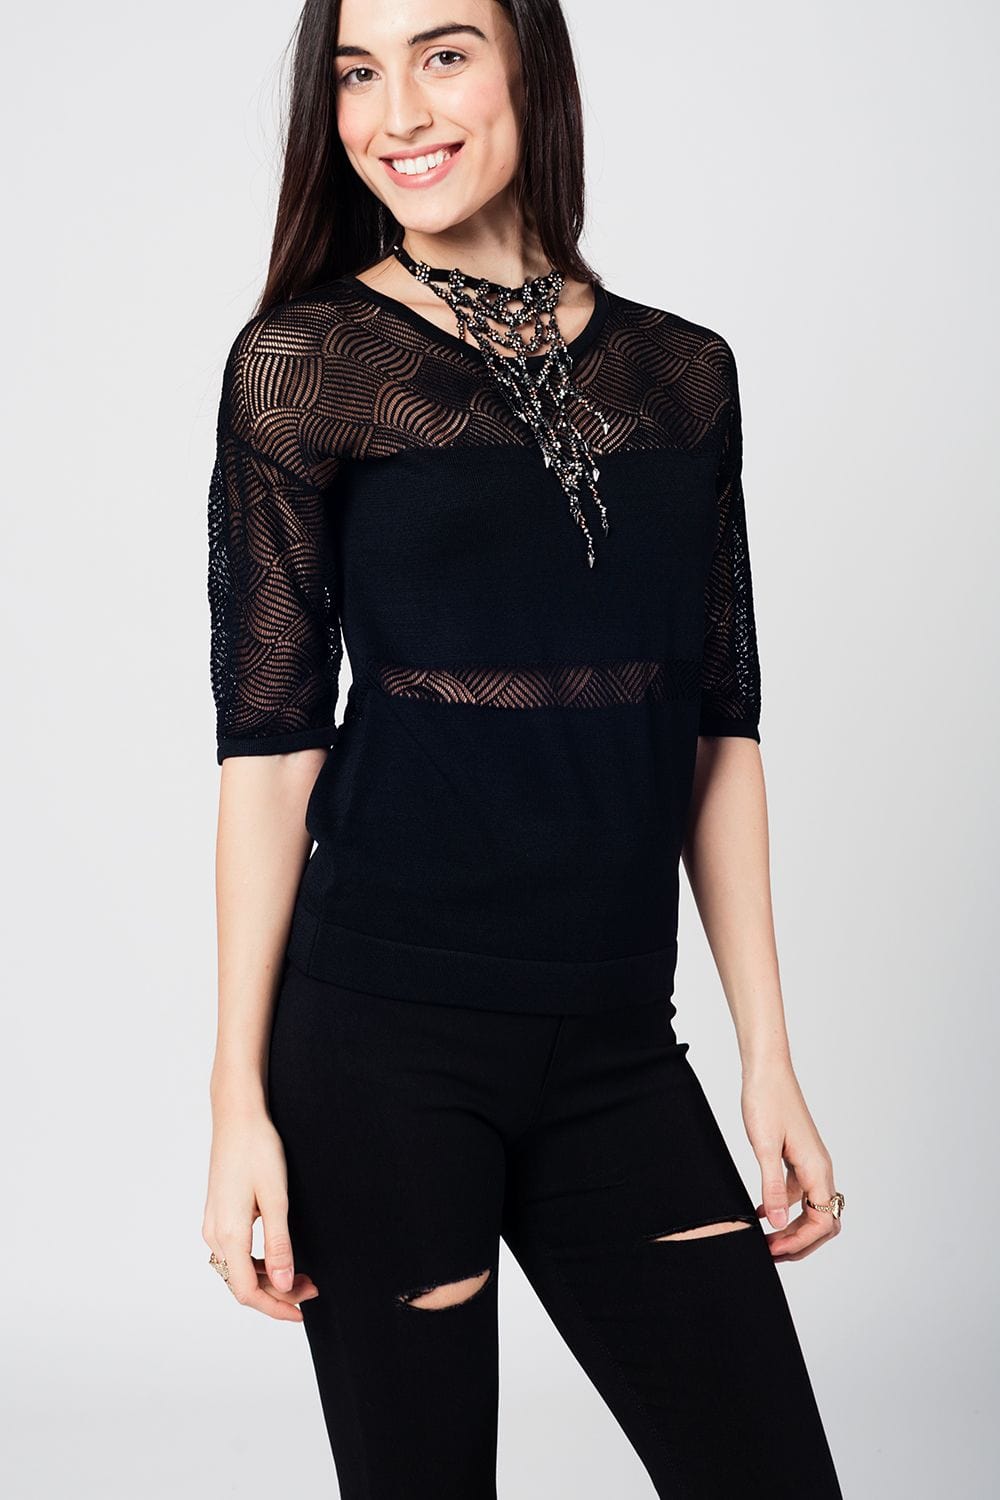 Q2 Women's Sweater Black knitted top with lace contrast detail